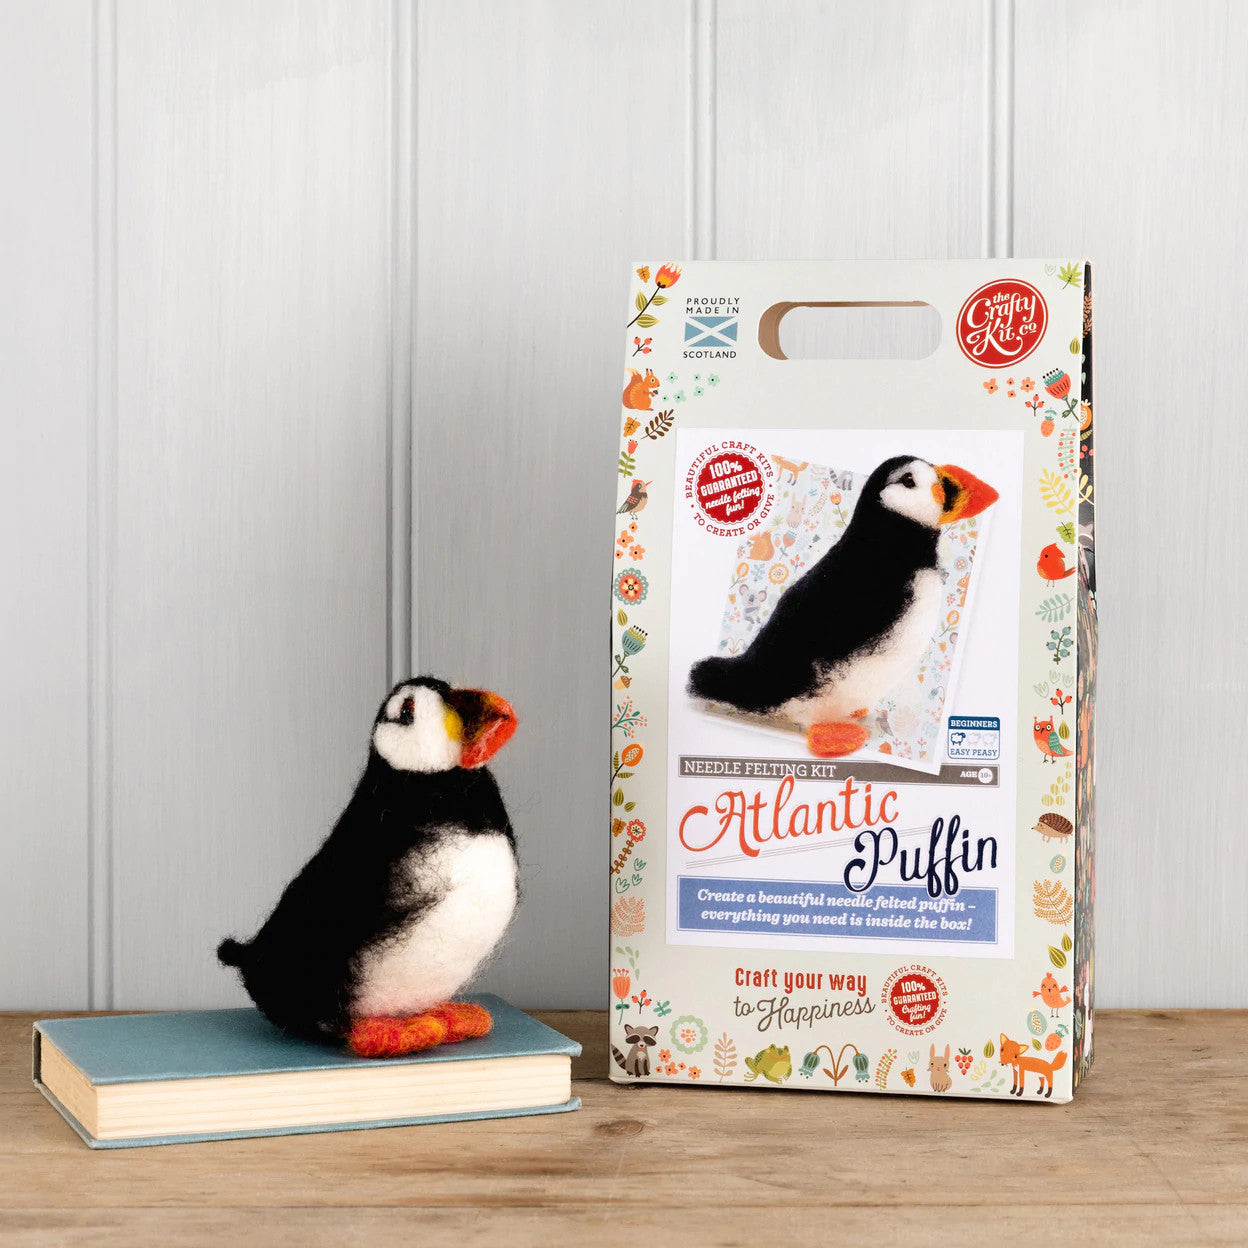 British Birds - Atlantic Puffin Needle Felting Kit from The Crafty Kit Co. Made in Scotland